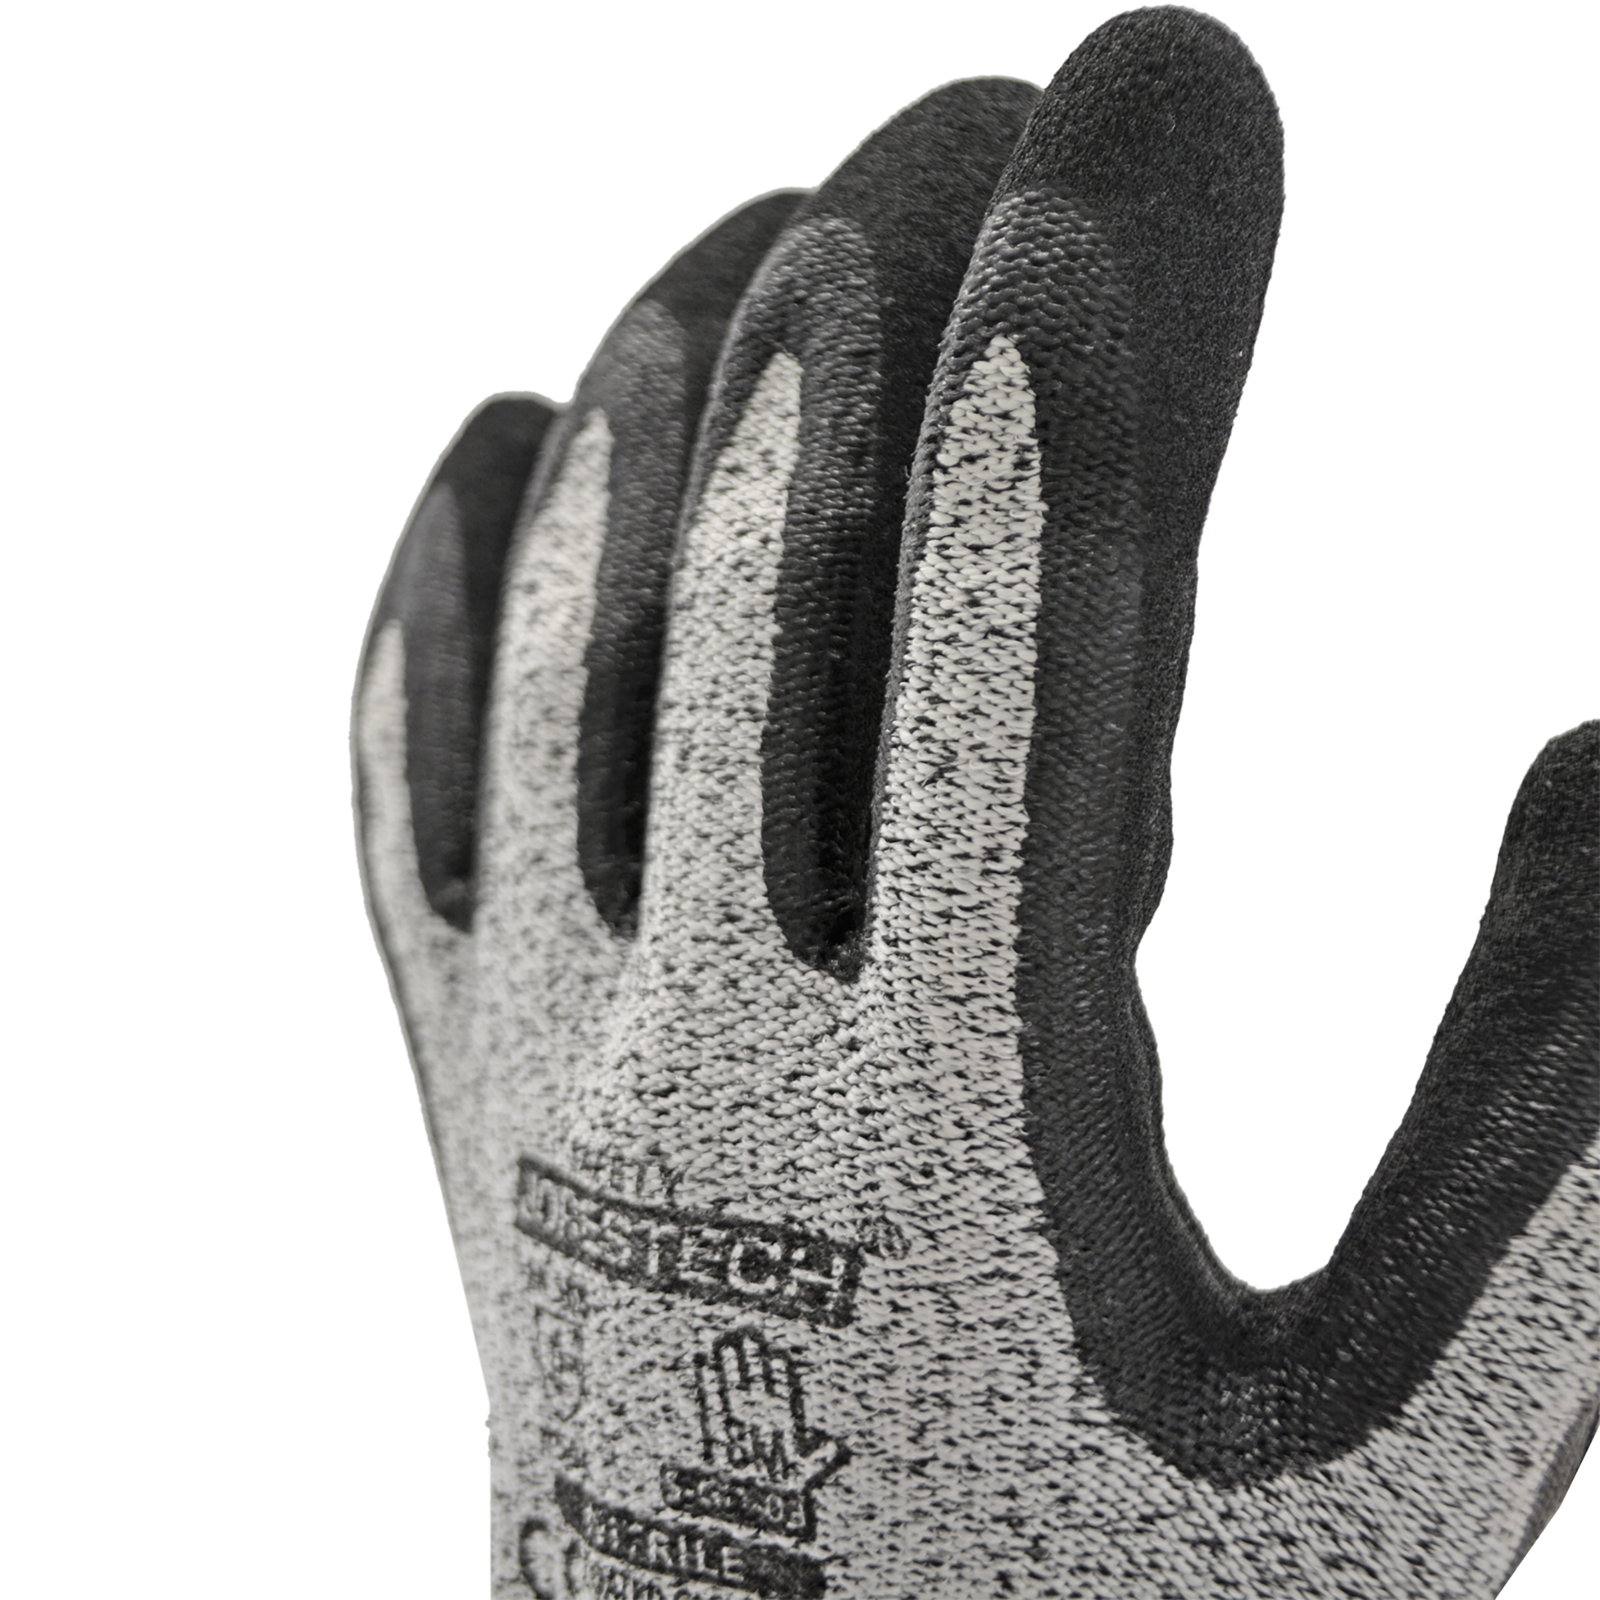 Close up of the gray fabric and the texture of the nitrile coating of the JORESTECH cut resistant glove  with nitrile dipped palms